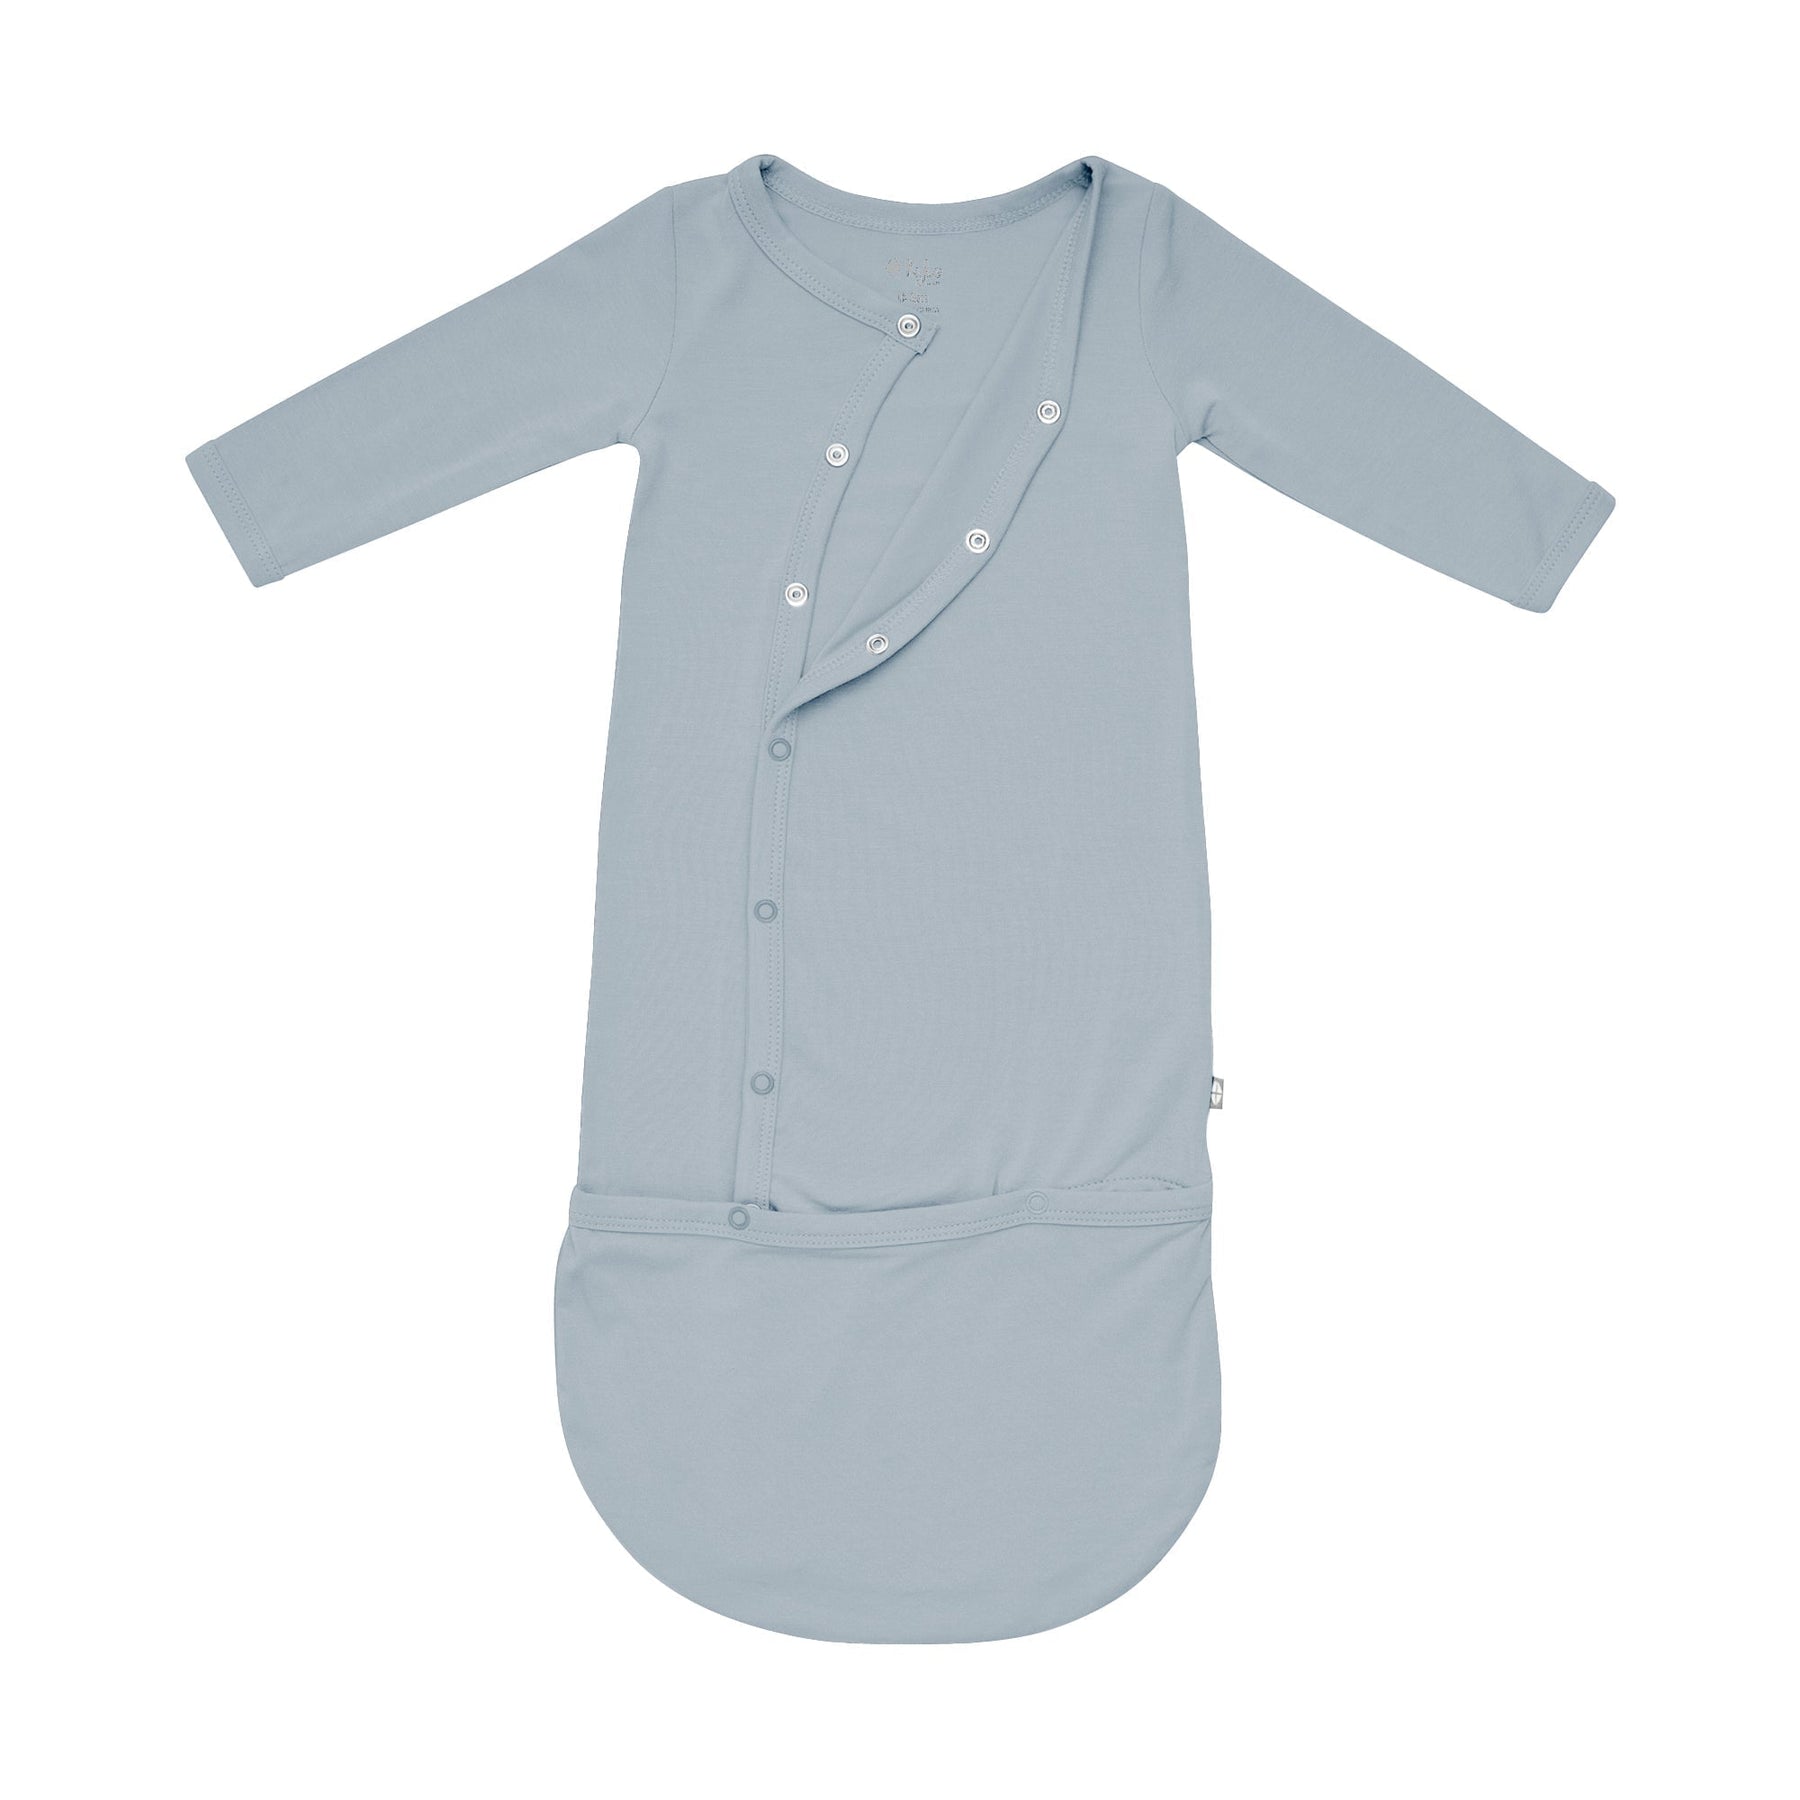  KYTE BABY Bundlers - Unisex Baby Sleeper Gowns Made of